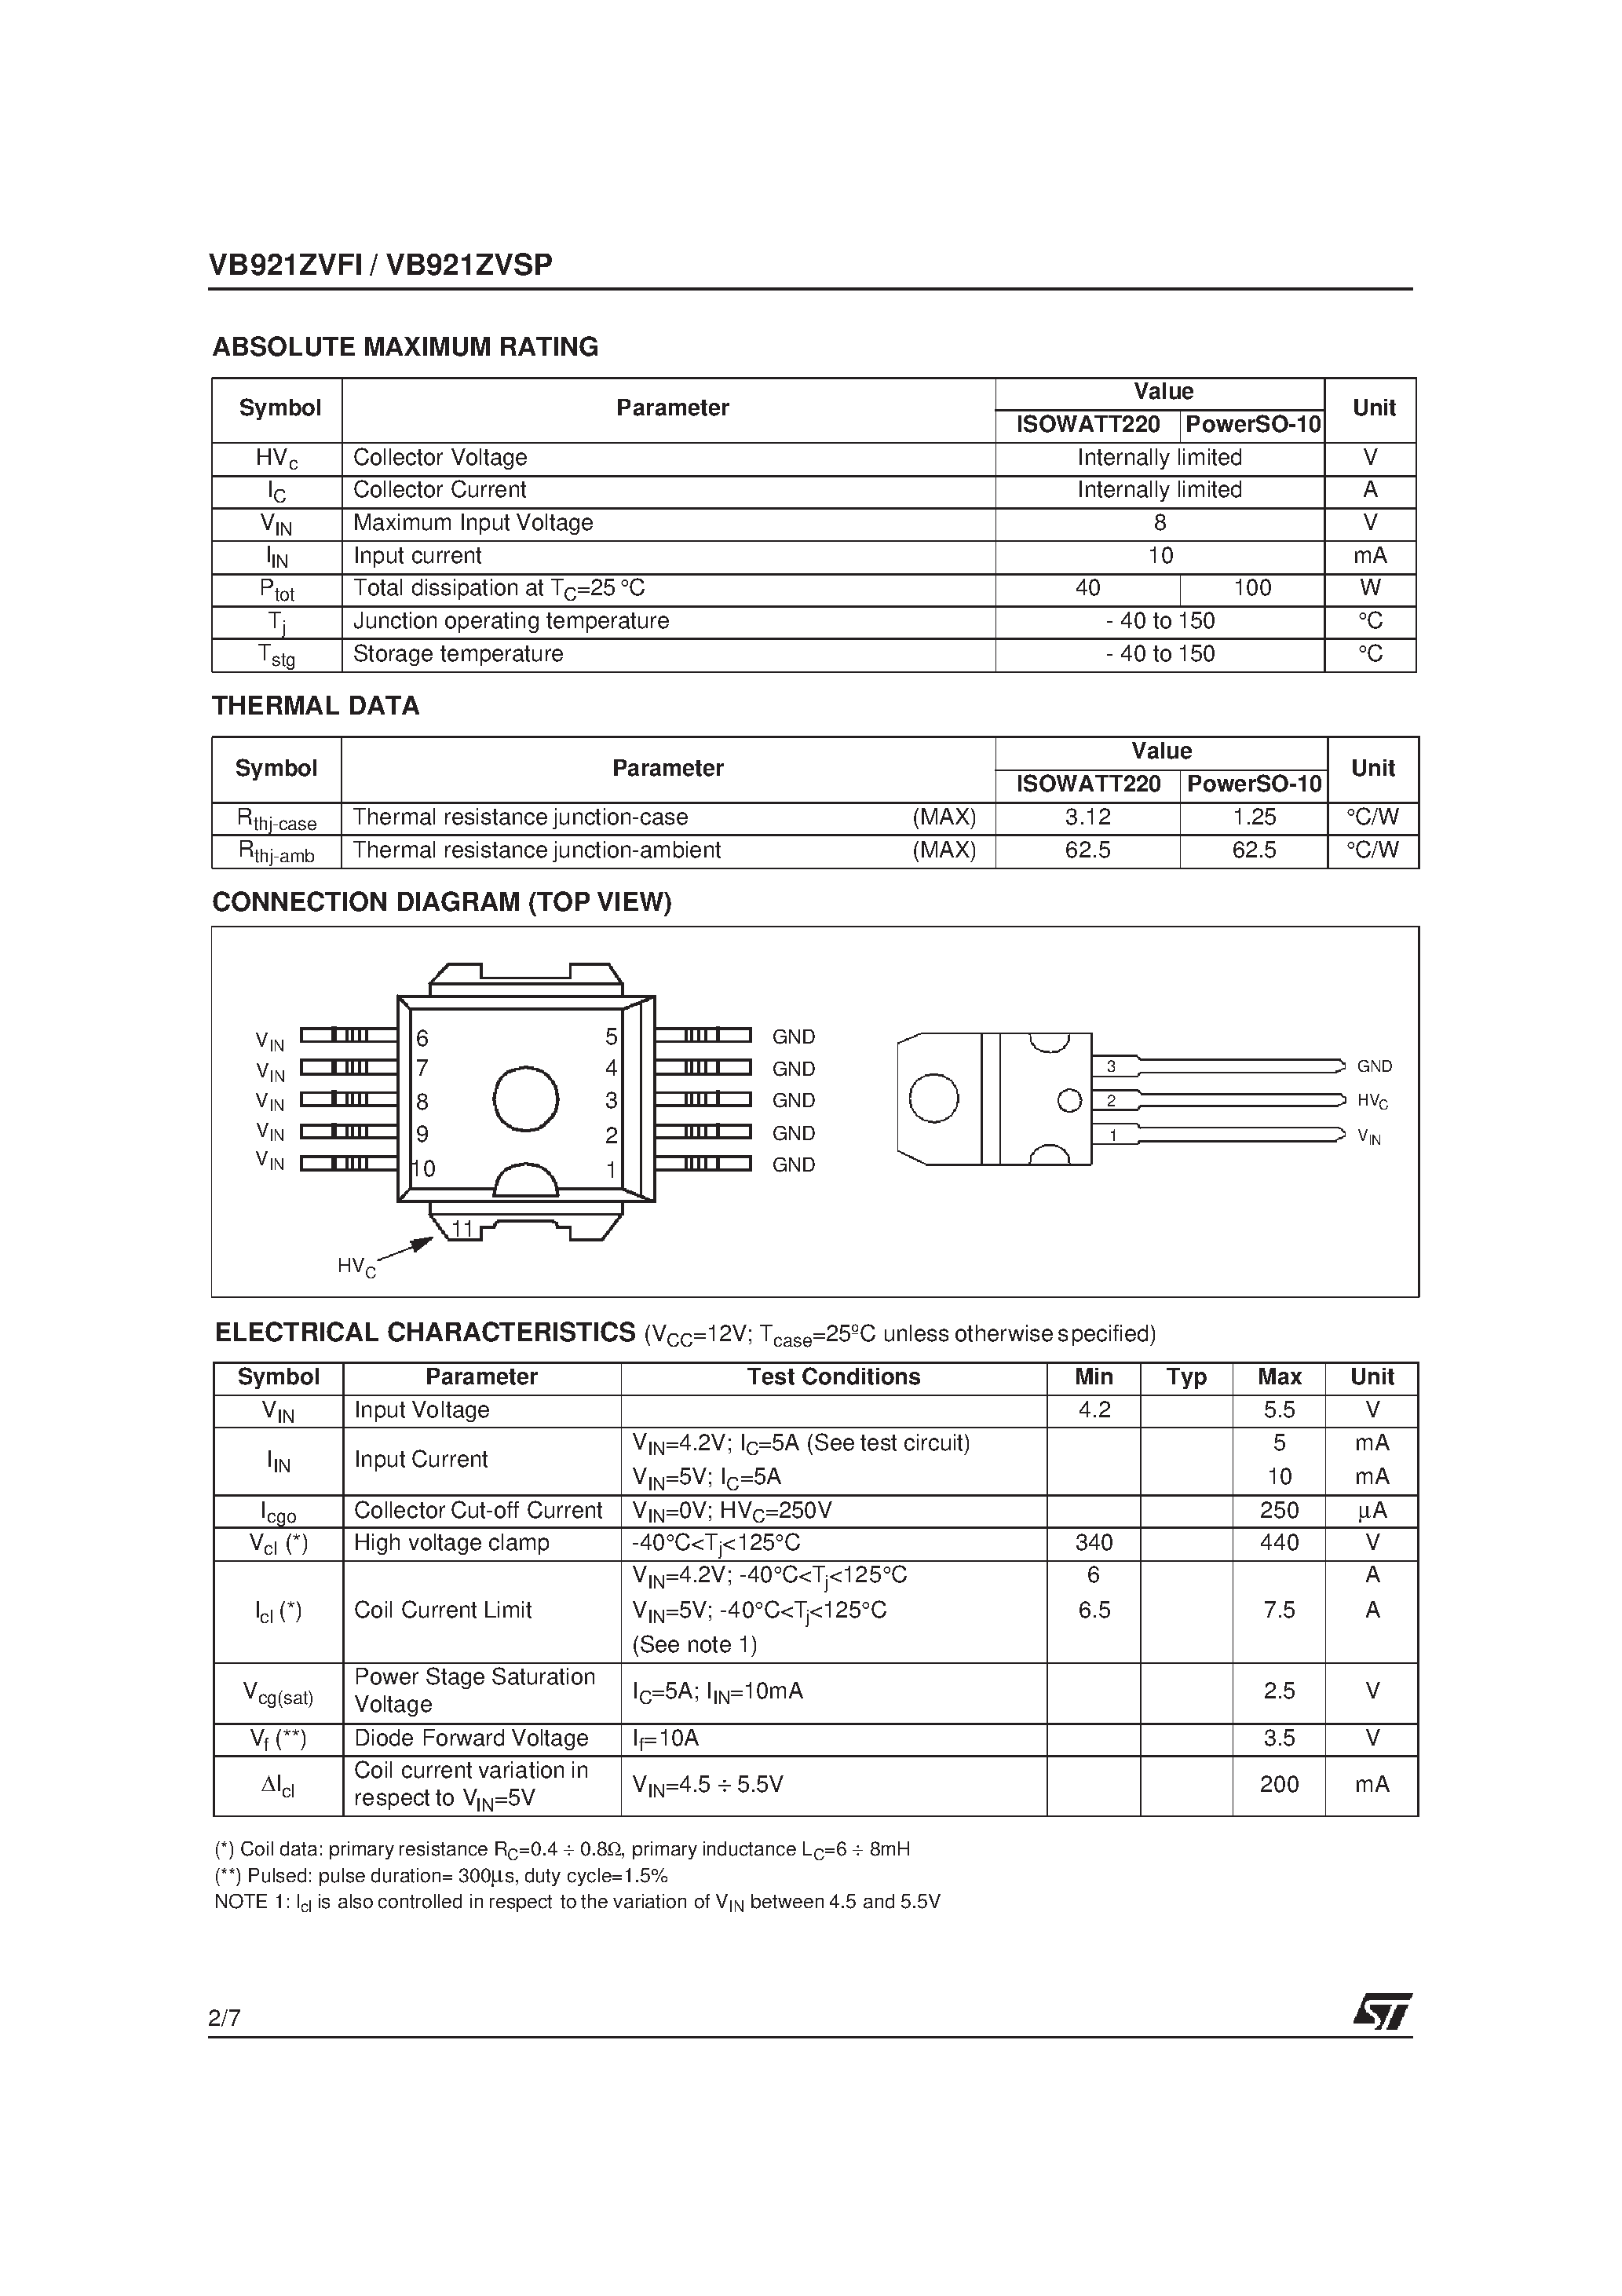 Datasheet VB921ZVFI - HIGH VOLTAGE IGNITION COIL DRIVER POWER I.C. page 2